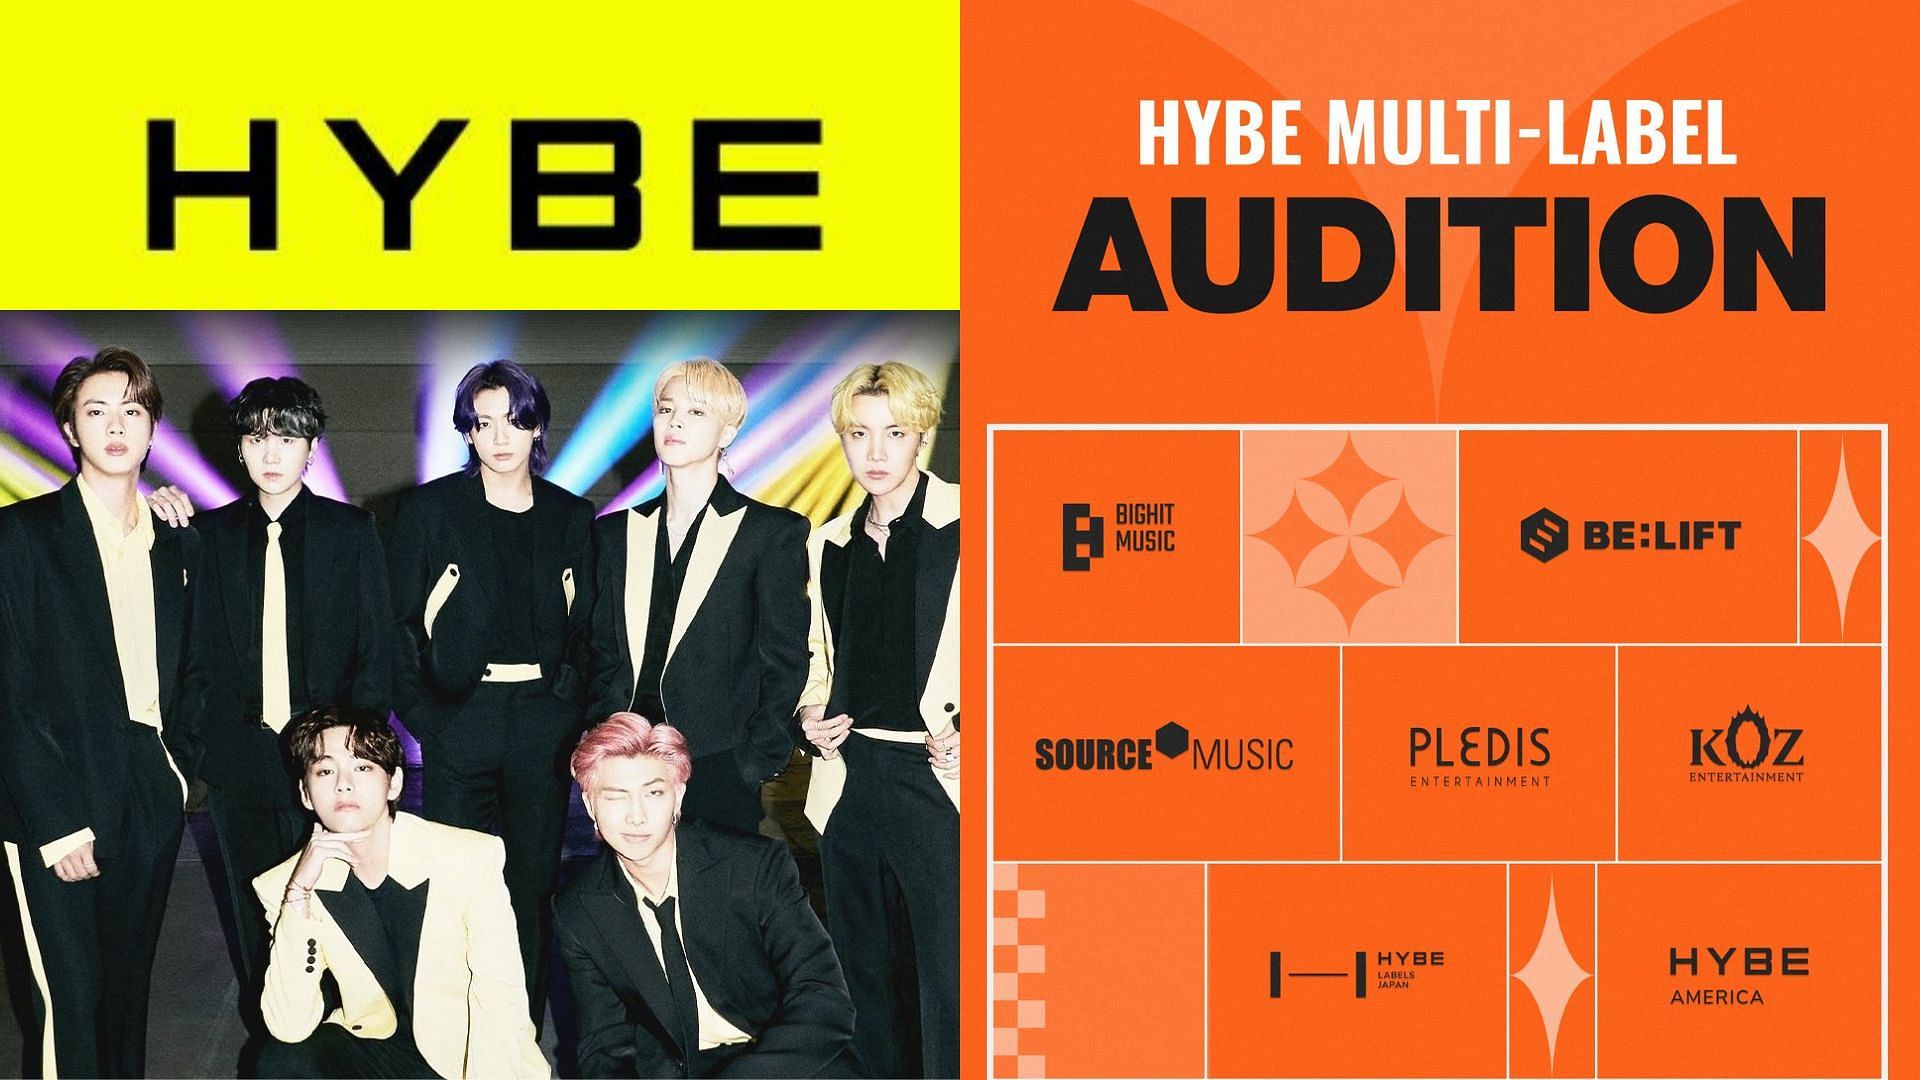 HYBE to hold global audition (Image via Instagram/hybe.labels.audition)